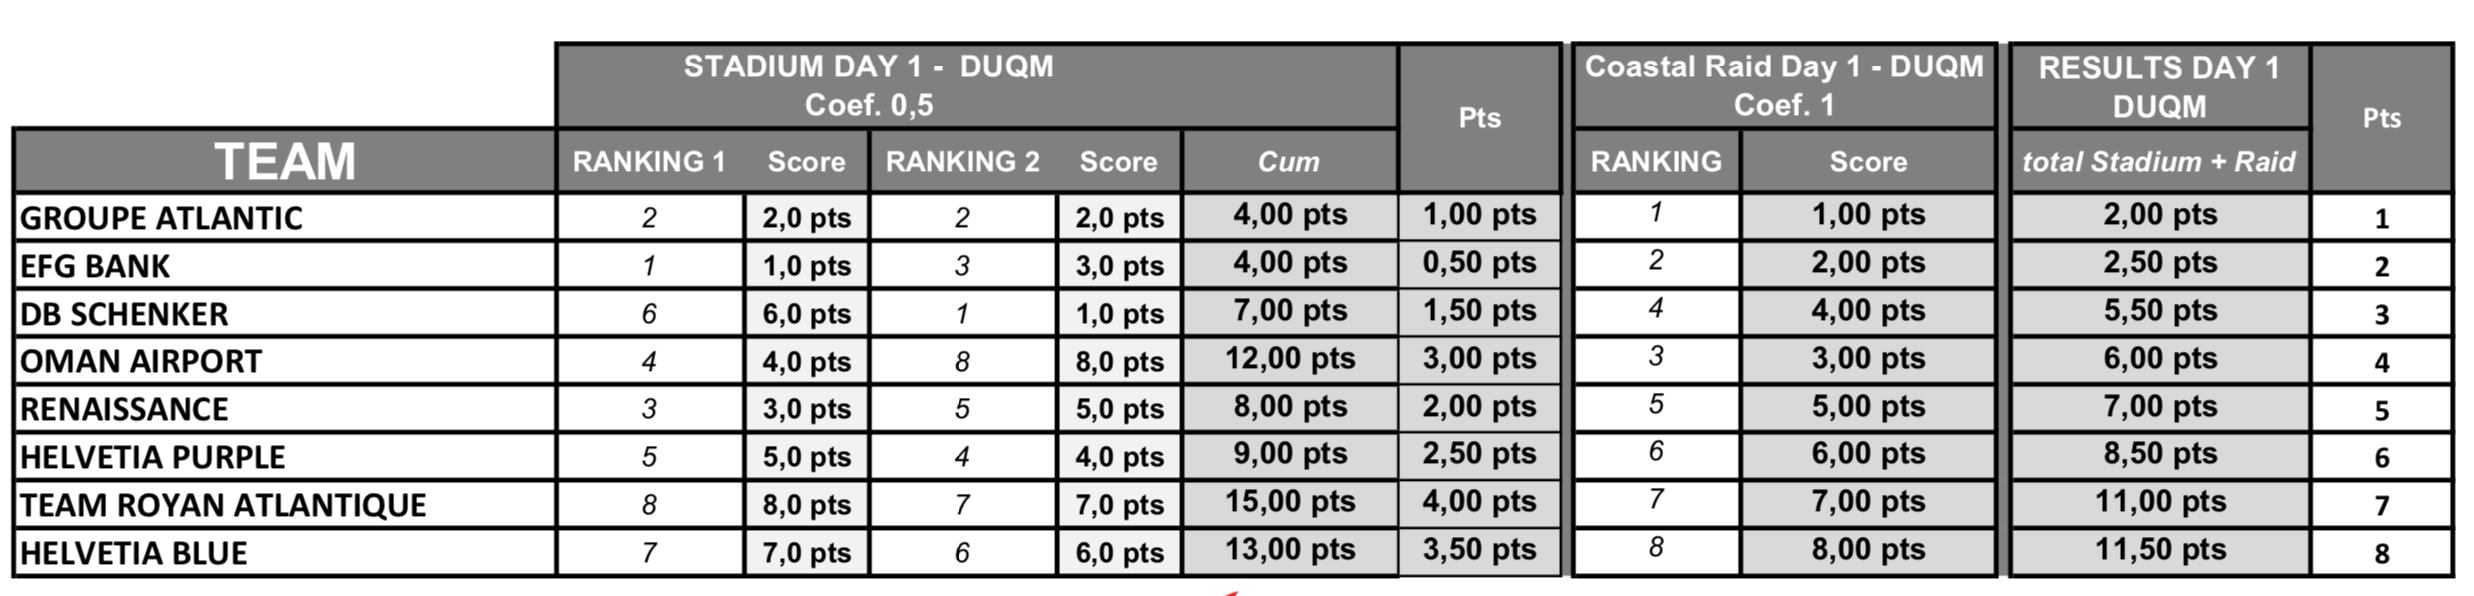 RESULTS FROM DUQM